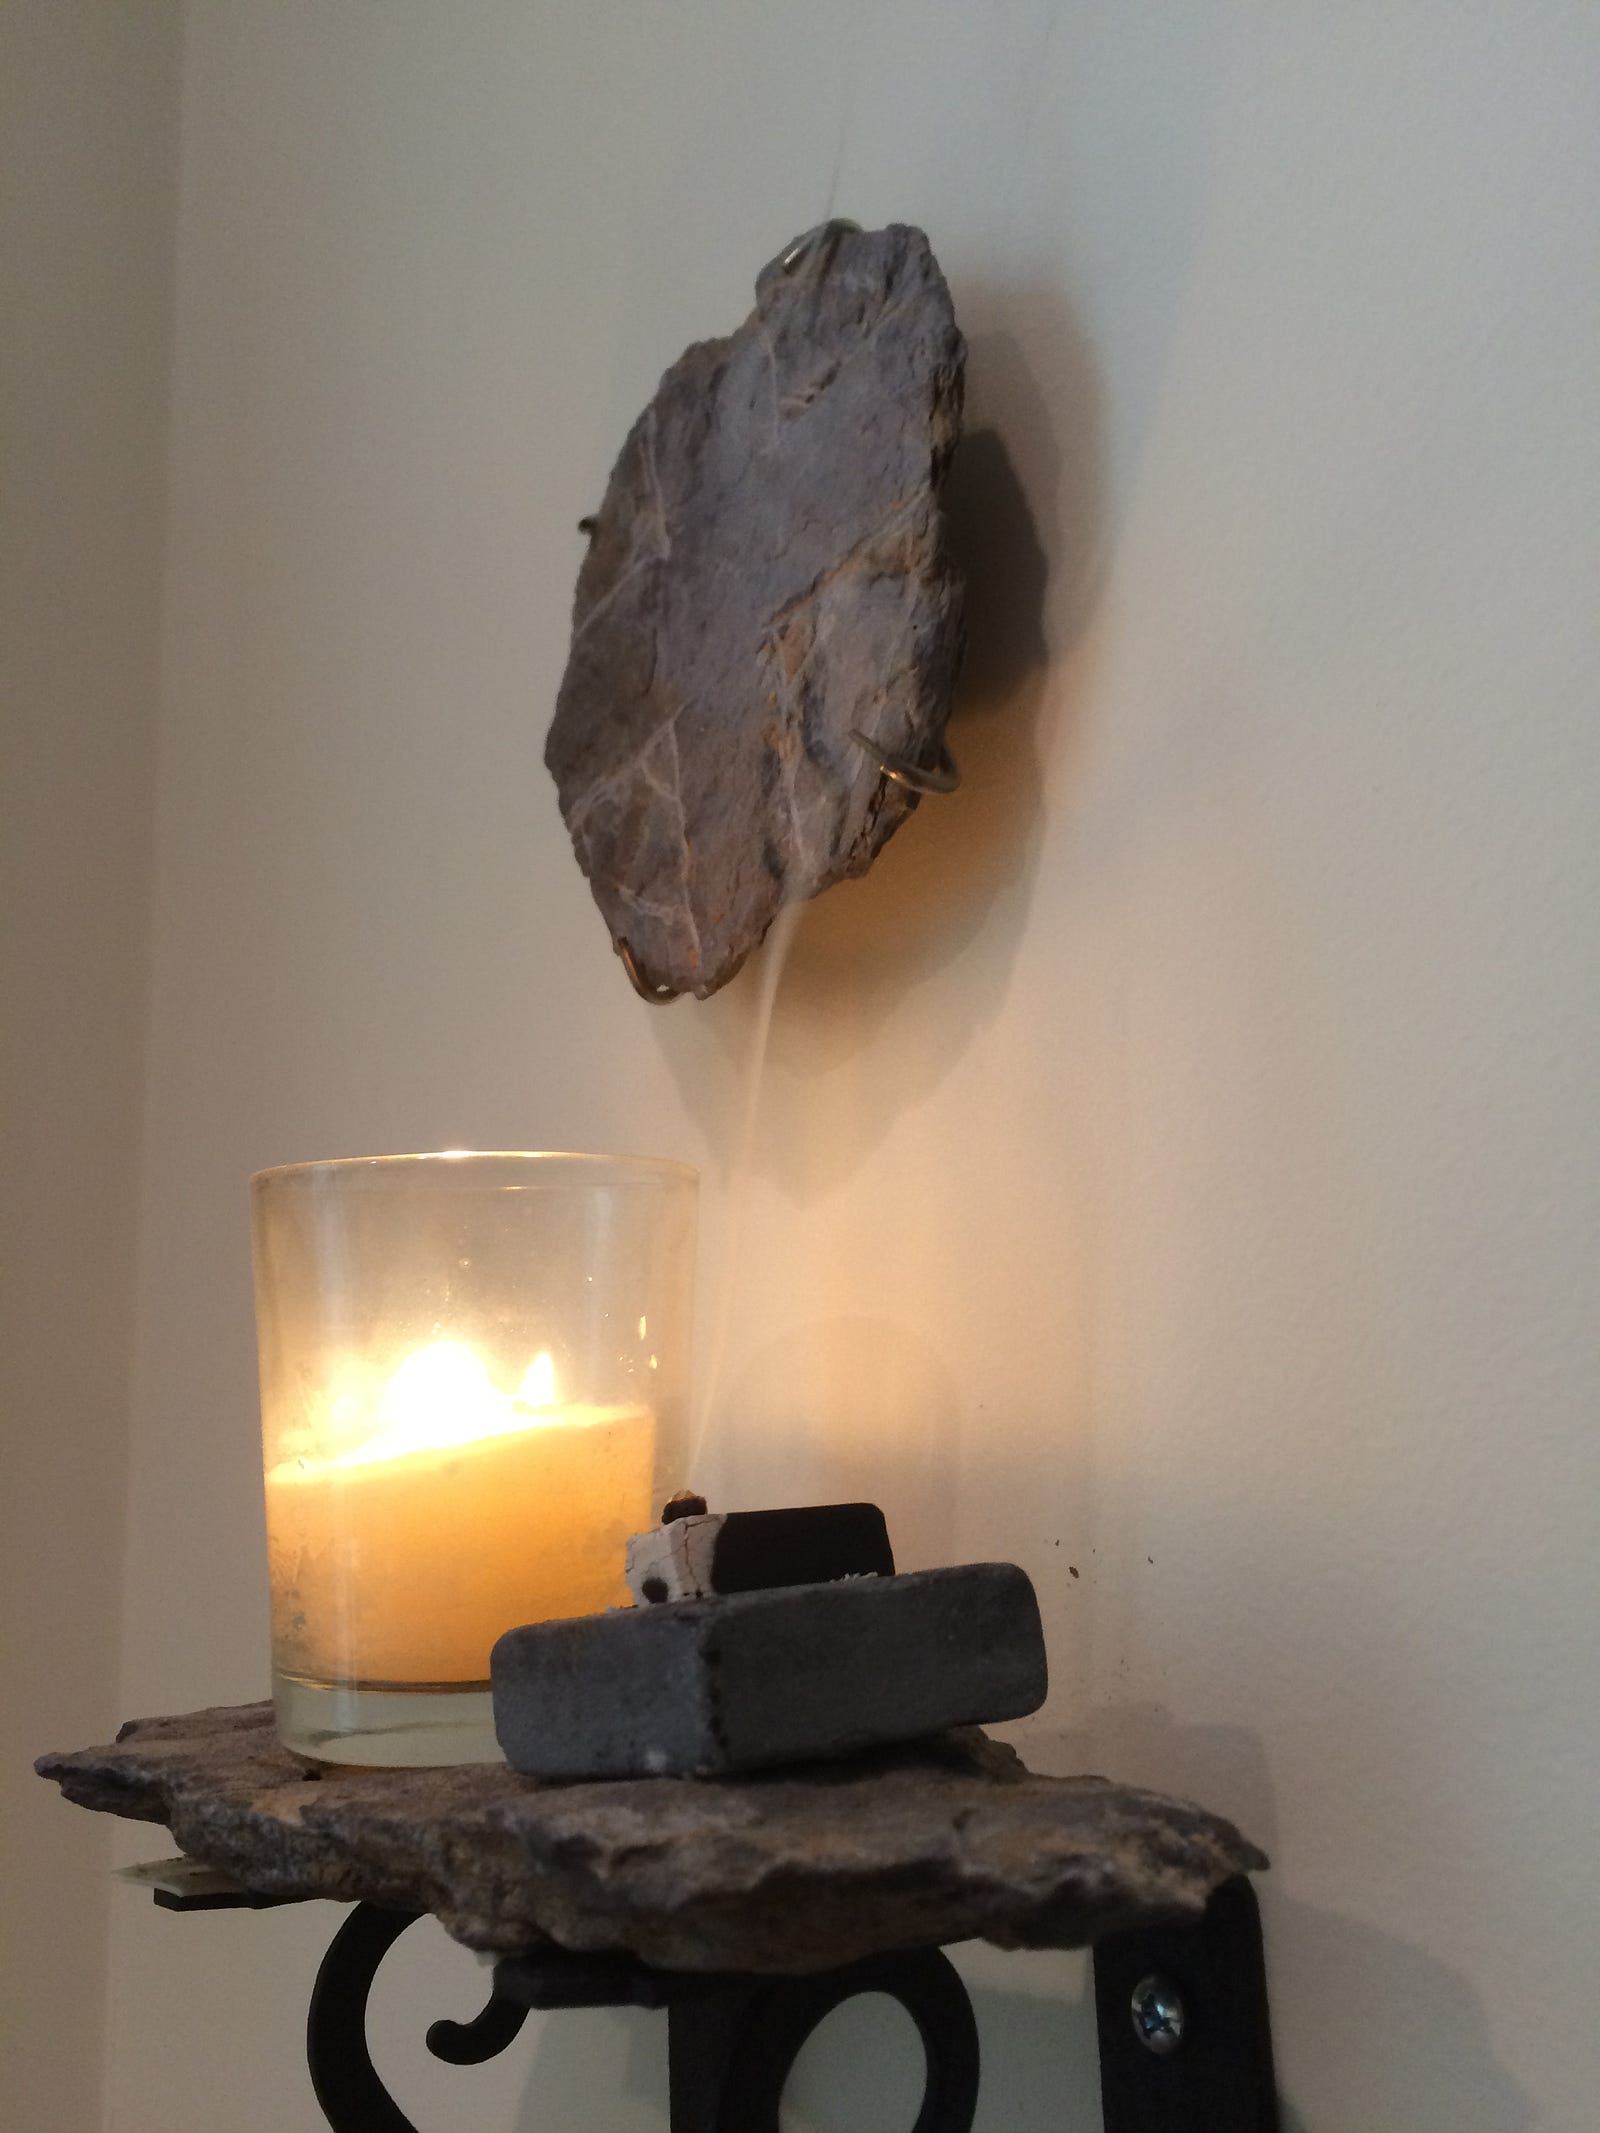 Photo of a candle and burning incense on a shelf below a cross fashioned from rock taken on Valentia Is, Ireland.